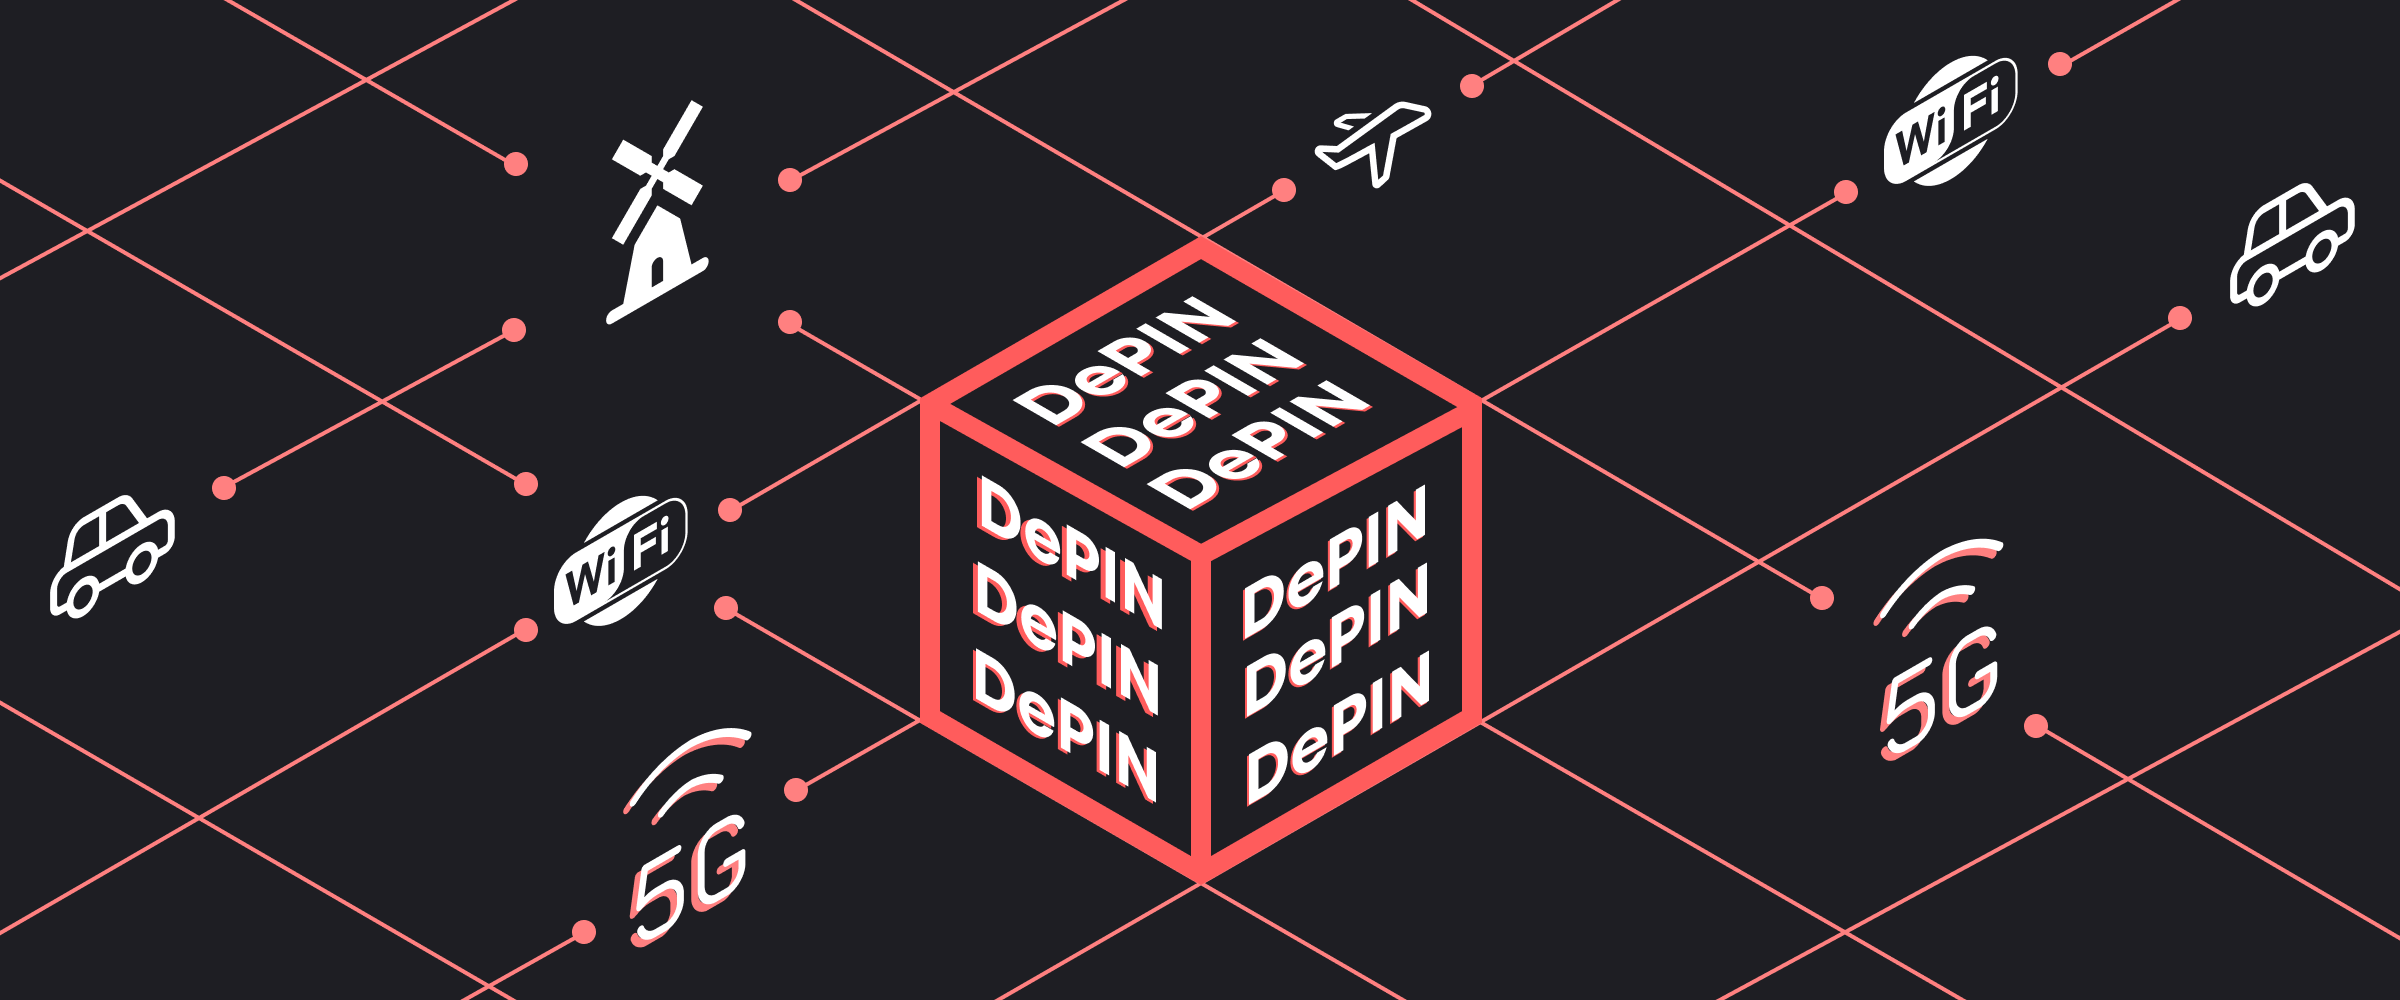 DePIN leverages blockchain technology to incentivize the creation and maintenance of physical infrastructure through the use of tokens, smart contracts, and dApps